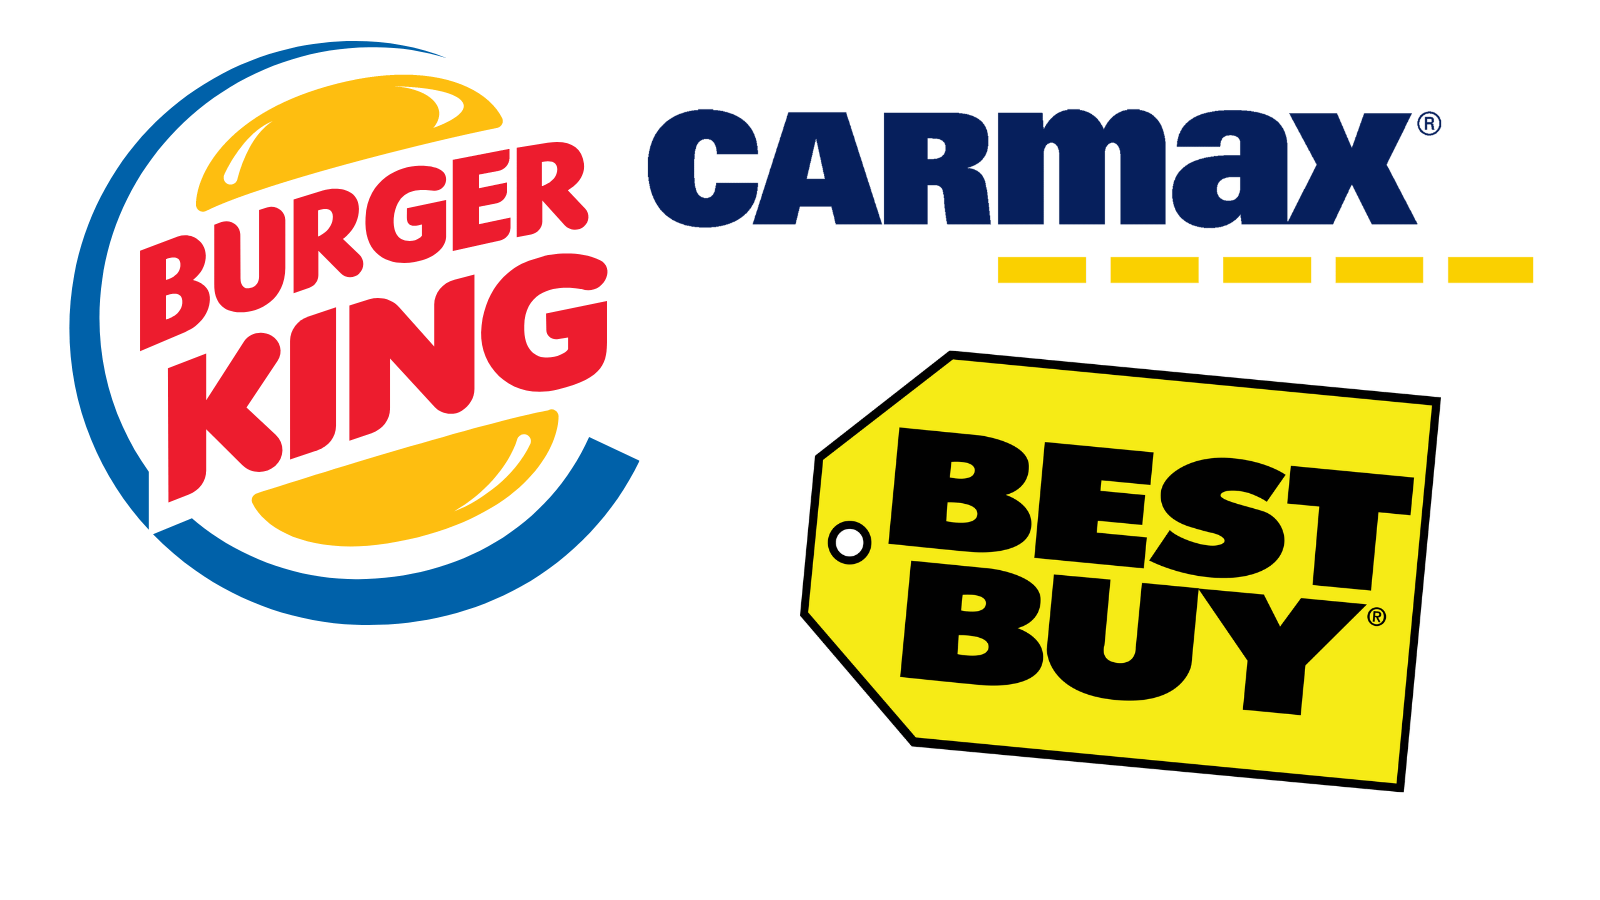 The logos for Burger King, Carmax, and Best Buy